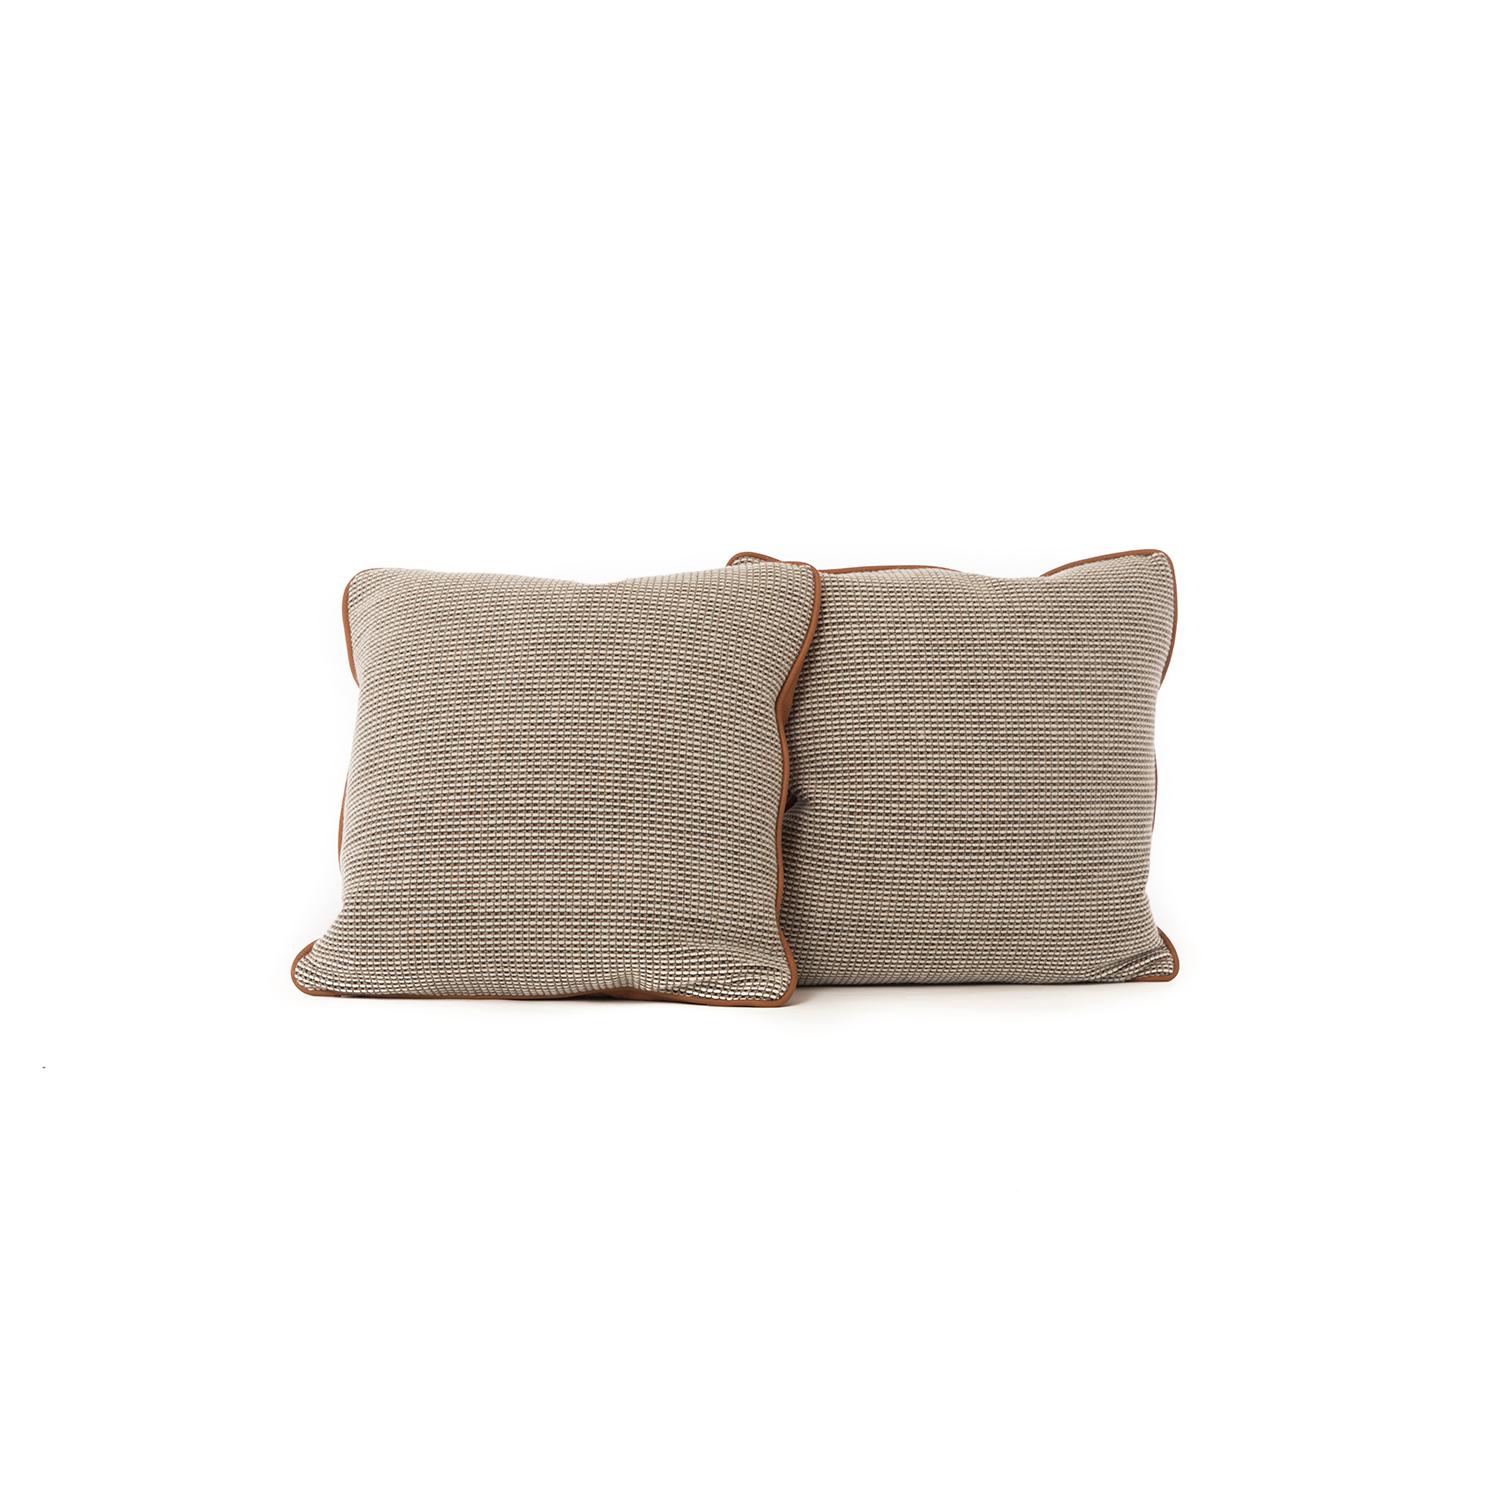 These positively cozy throw pillows are menswear inspired, with supple cognac leather backs and piping, complemented by woven wool fronts in Cato by Knoll, colorway Sand'. These pillows are new and the only of their kind.